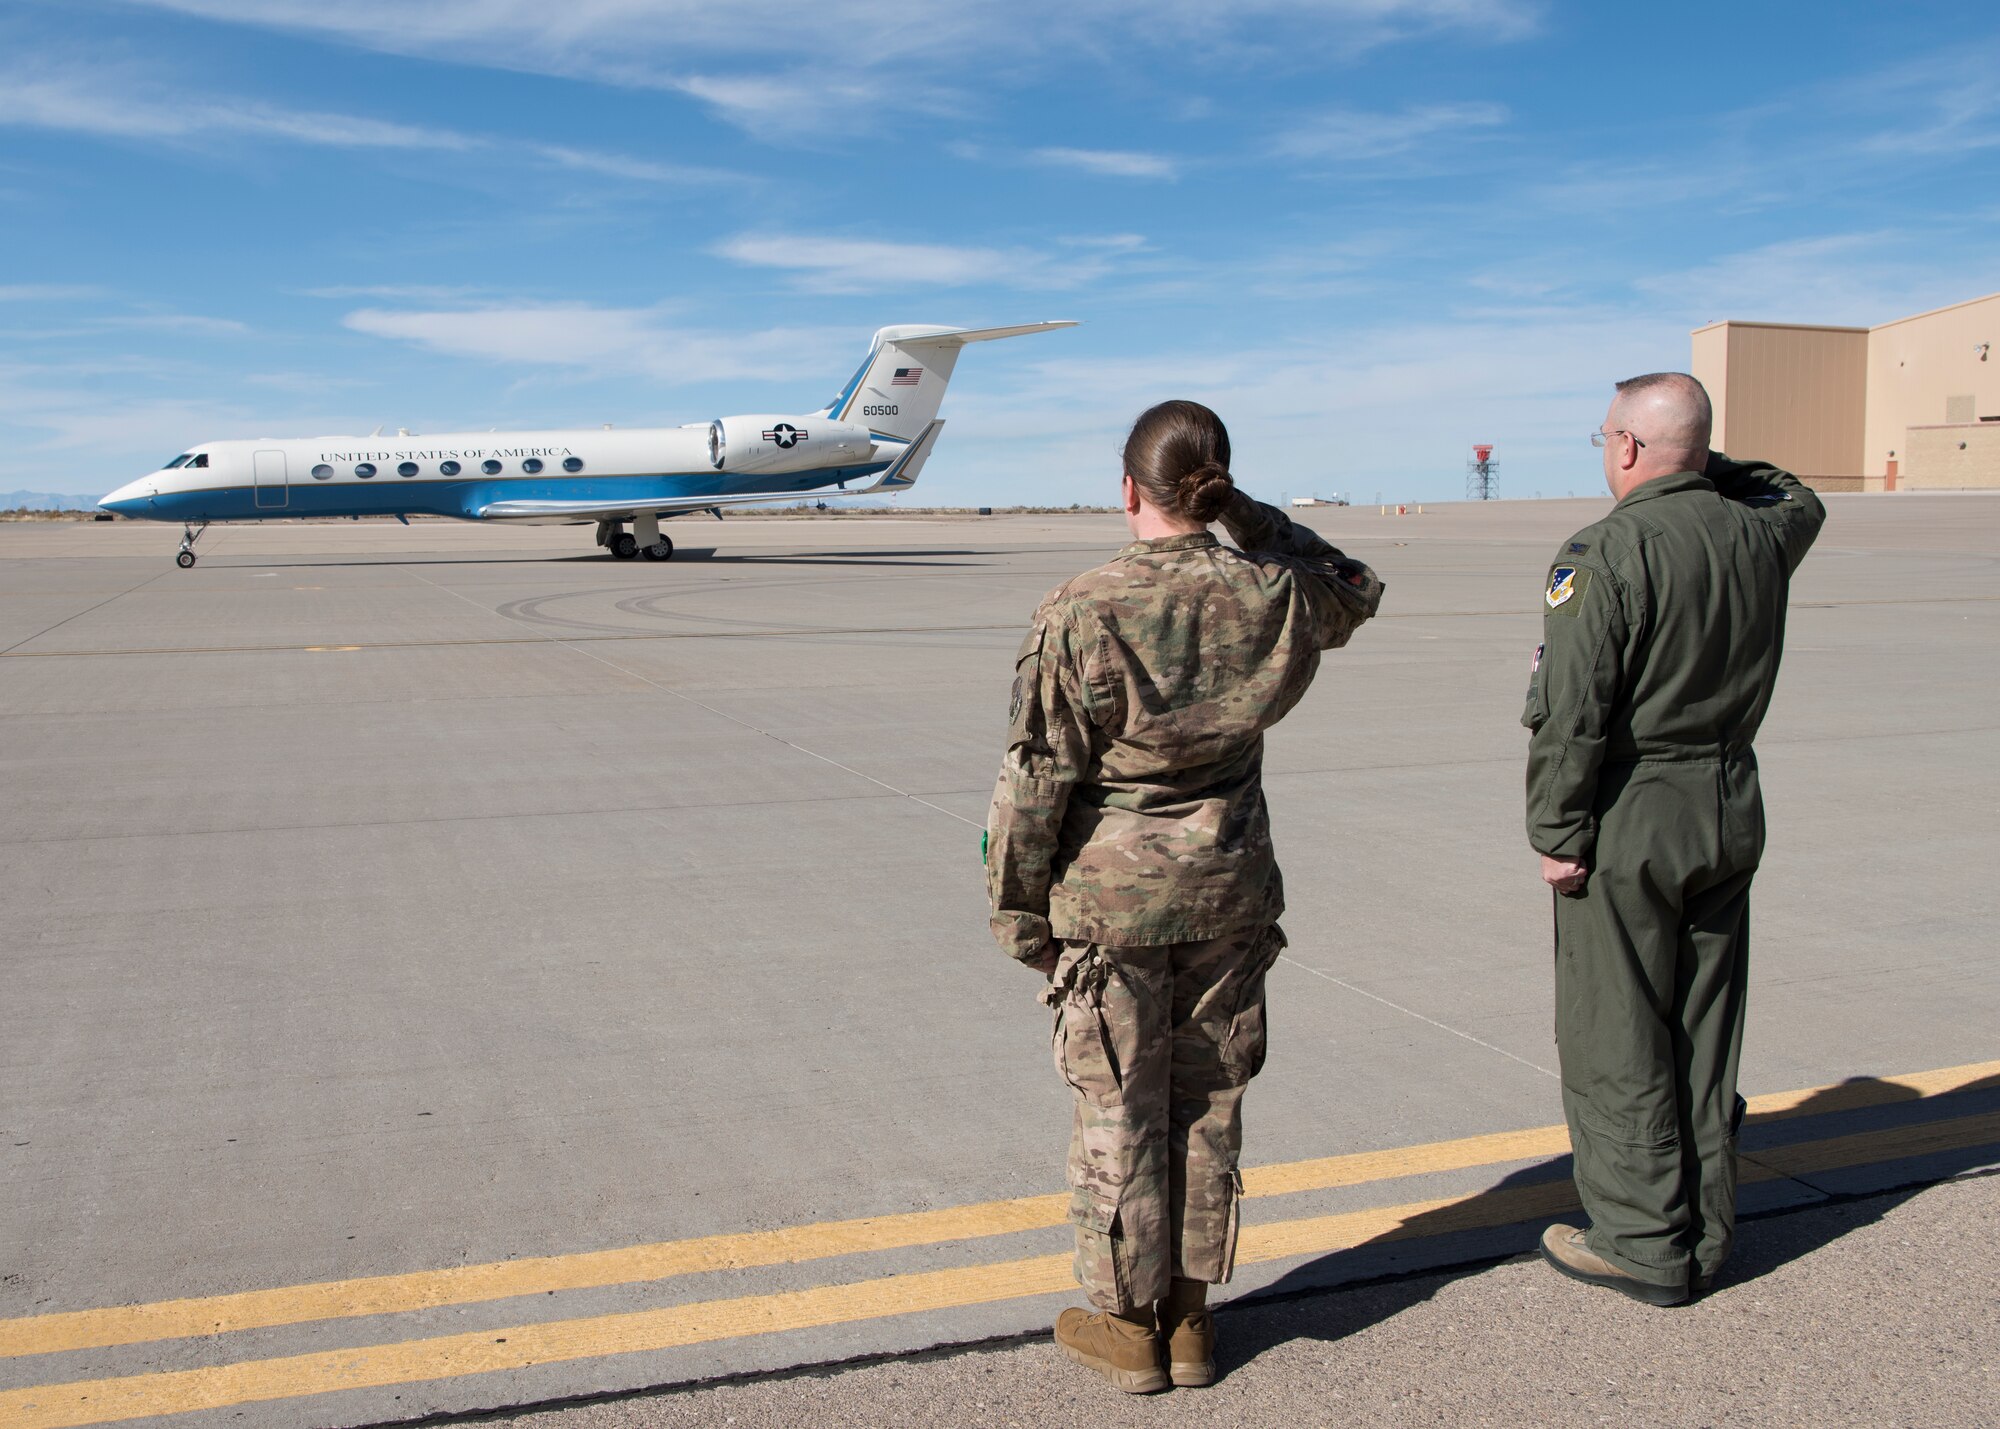 Col. Michael Boger, 54th Fighter Group commander and Tech. Sgt. Whitney O’Neill, 49th Wing protocol specialist, salute as Gen. Paul Selva, vice chairman of the Joint Chiefs of Staff, departs Holloman Air Force Base, N.M., November 14, 2018. Selva visited Holloman and White Sands Missile Range November 13 to 14. (U.S. Air Force photo by Staff Sgt. BreeAnn Sachs).